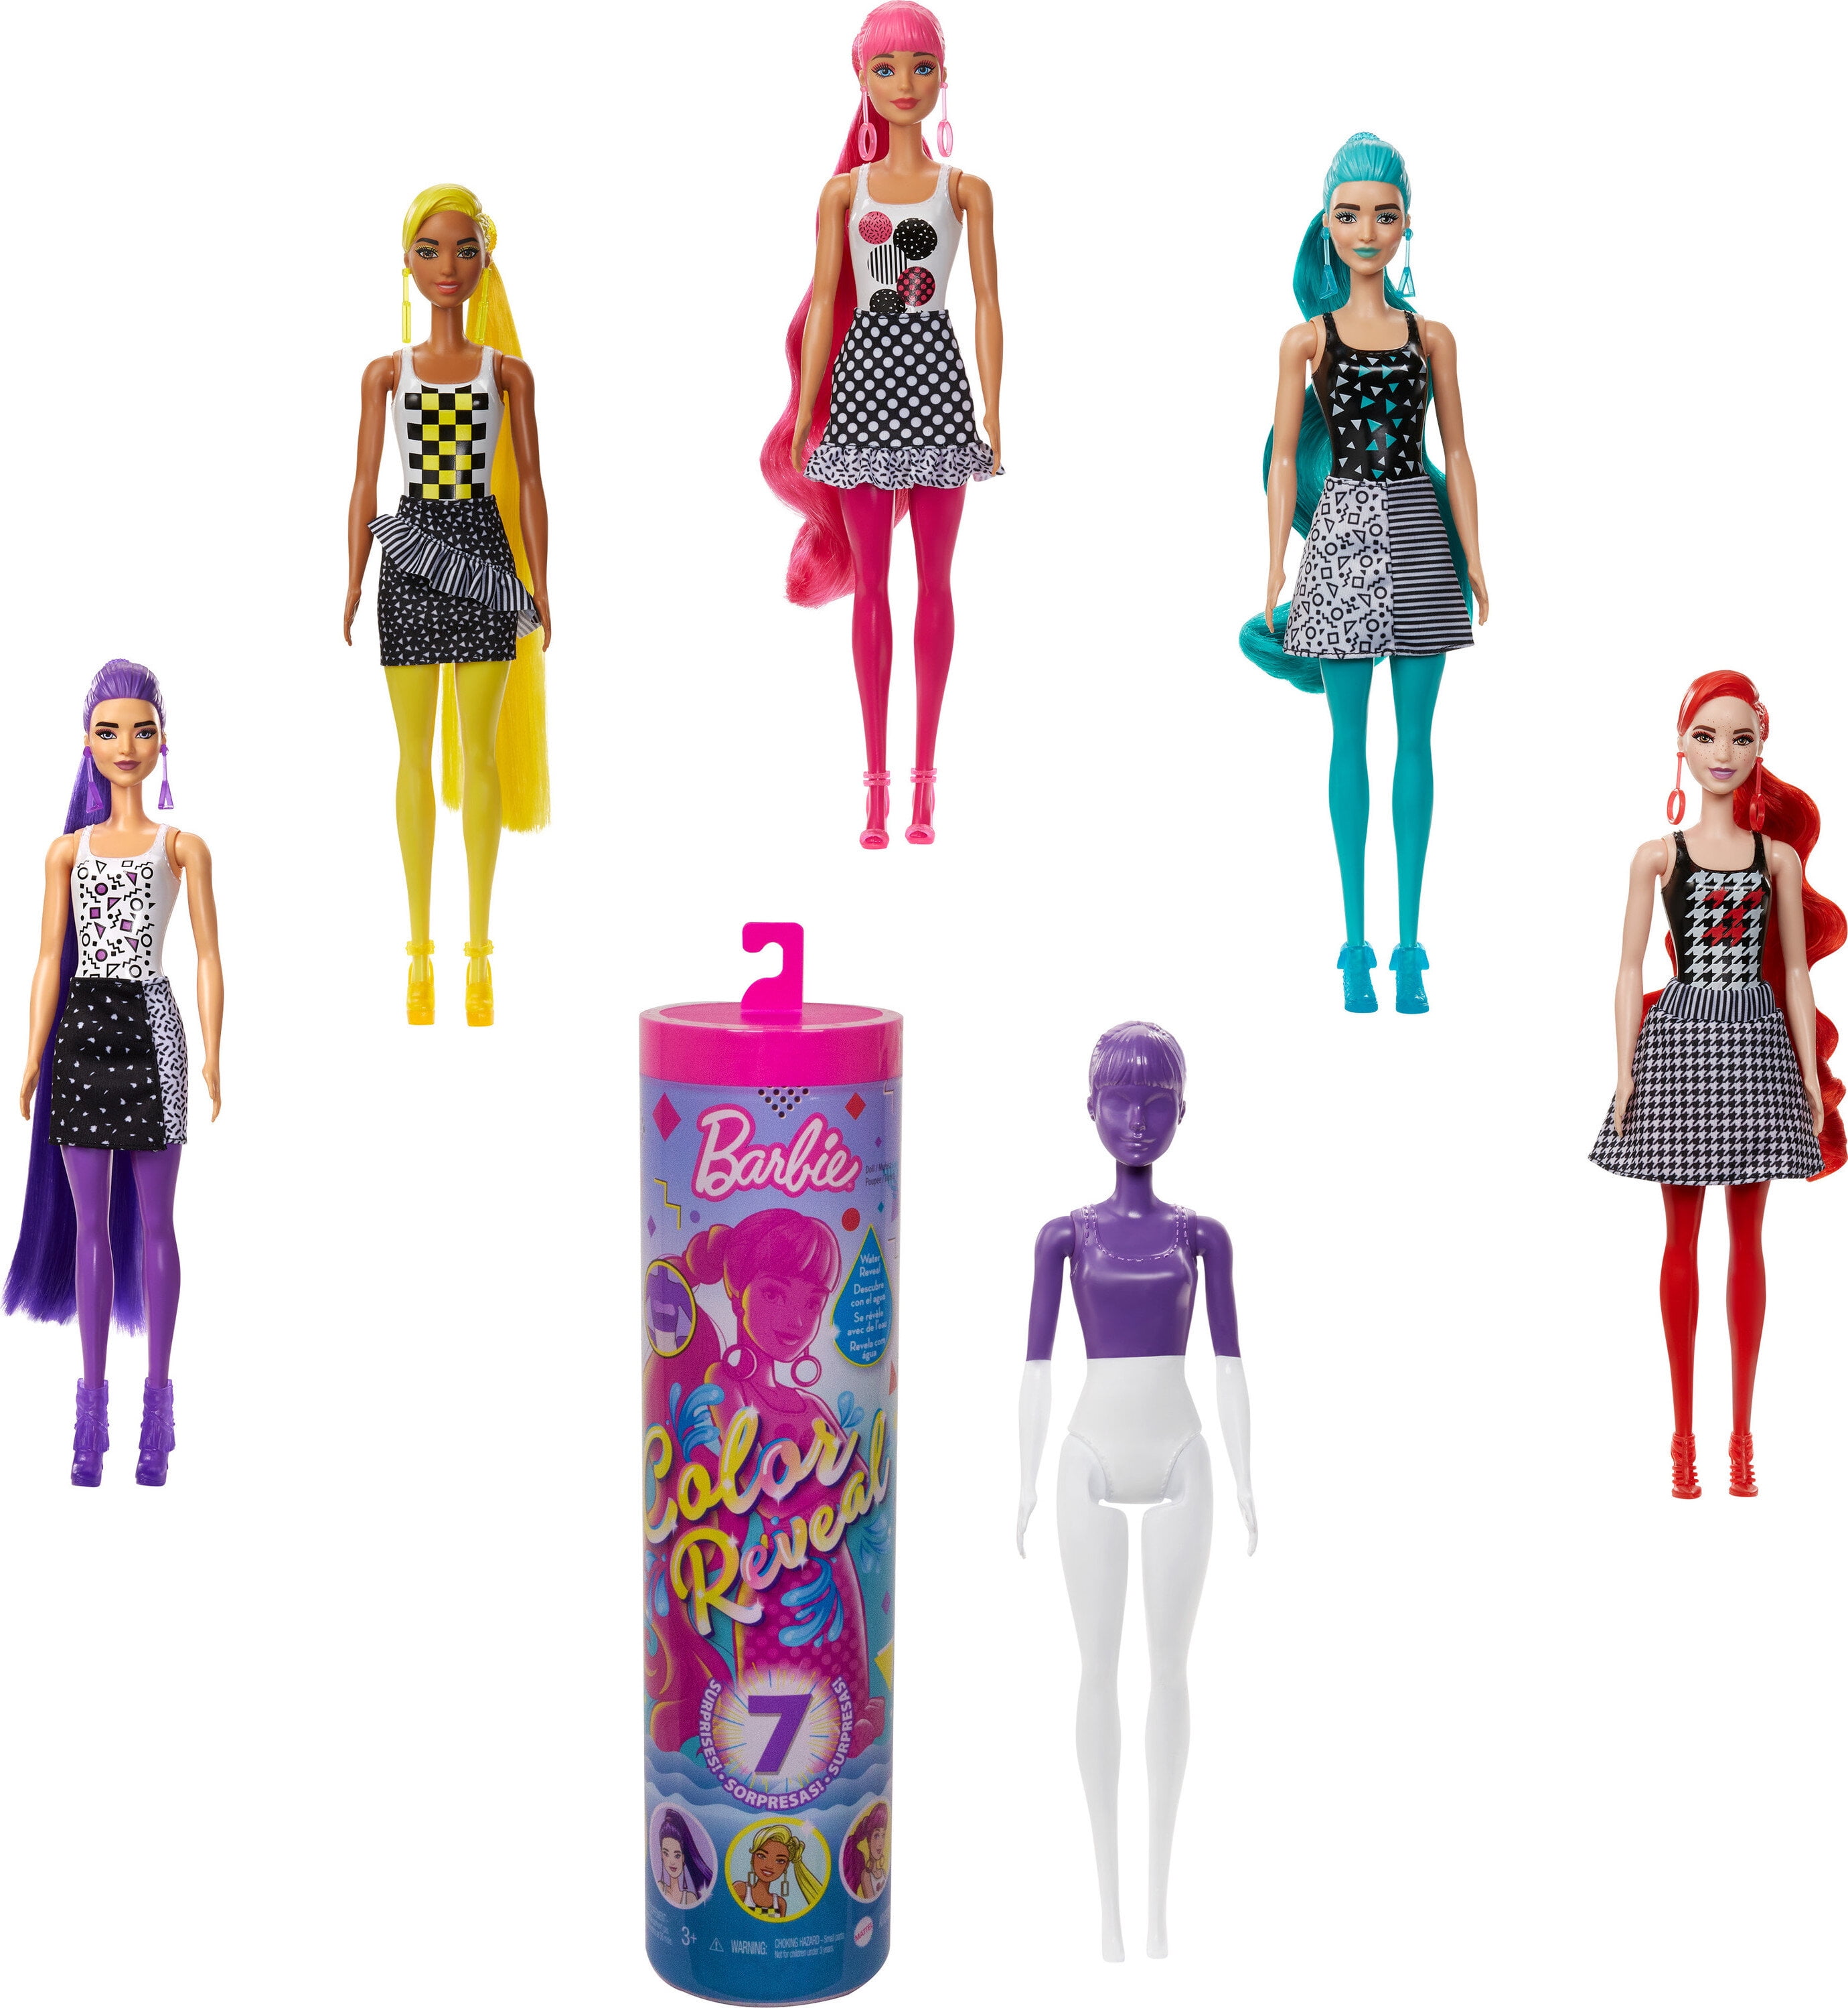 Barbie Color Reveal Doll With 7 Surprises For Kids 3 Years Old & Up ...